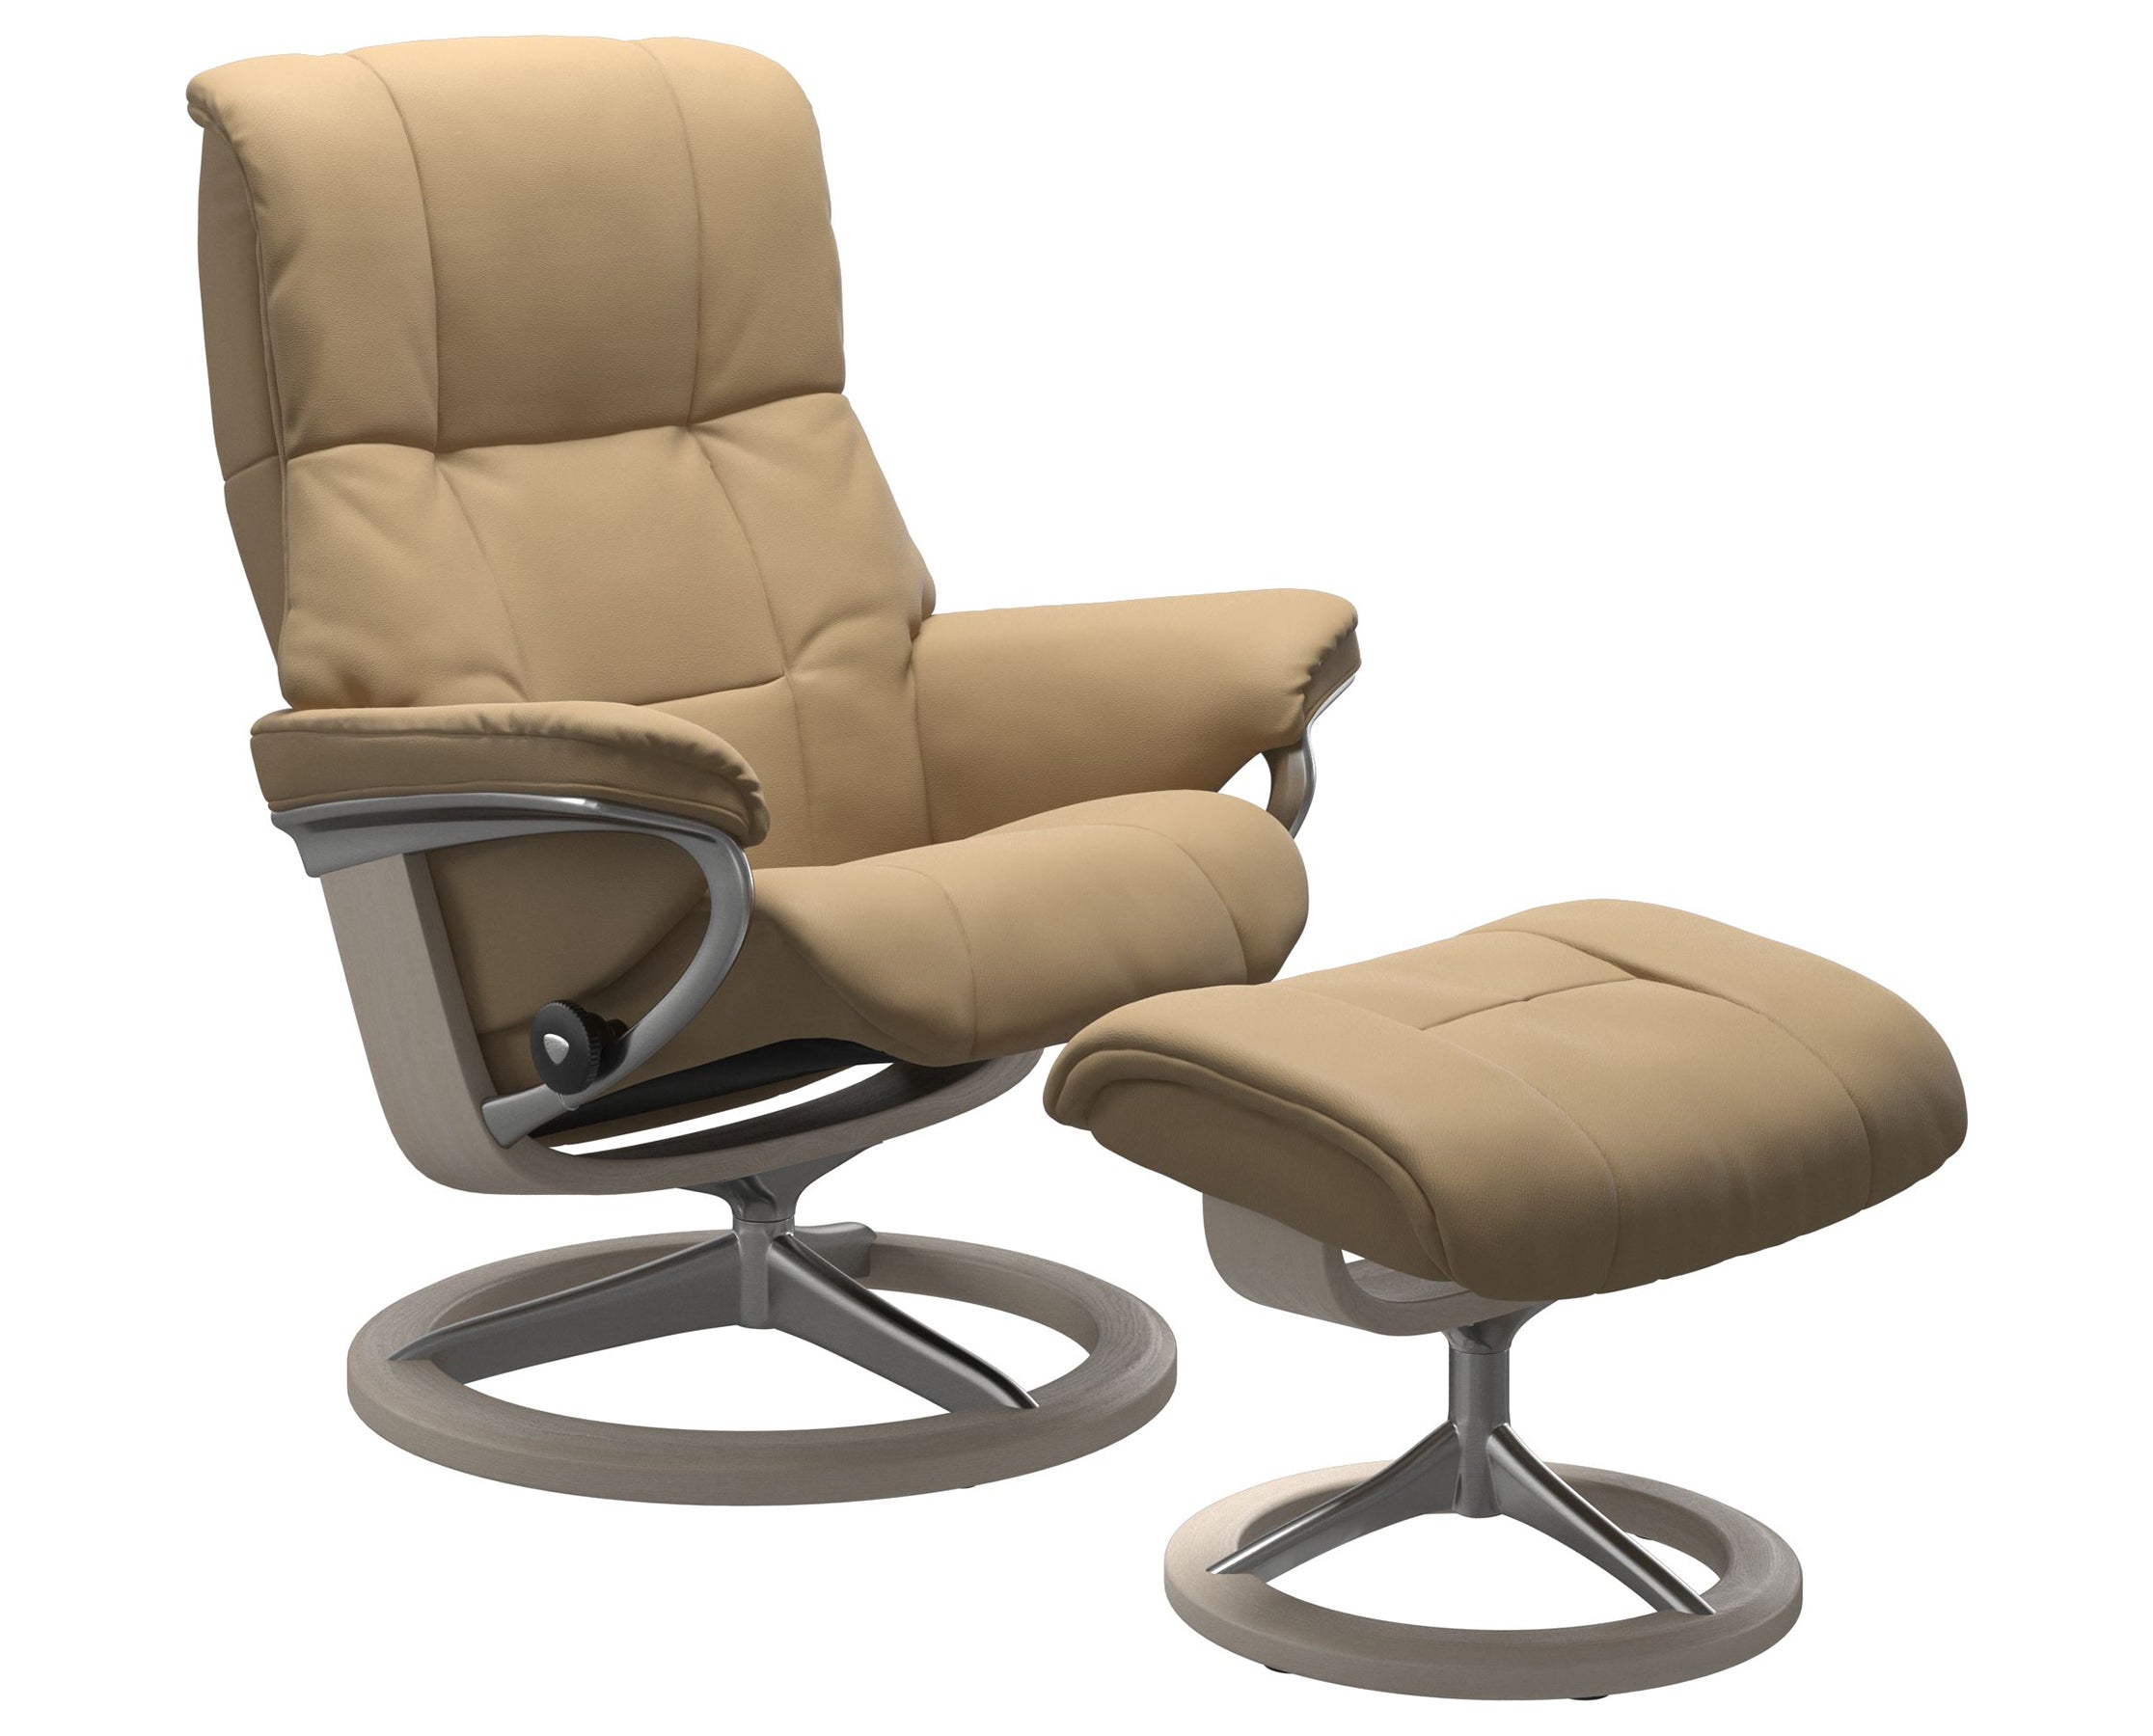 Paloma Leather Sand S/M/L and Whitewash Base | Stressless Mayfair Signature Recliner | Valley Ridge Furniture